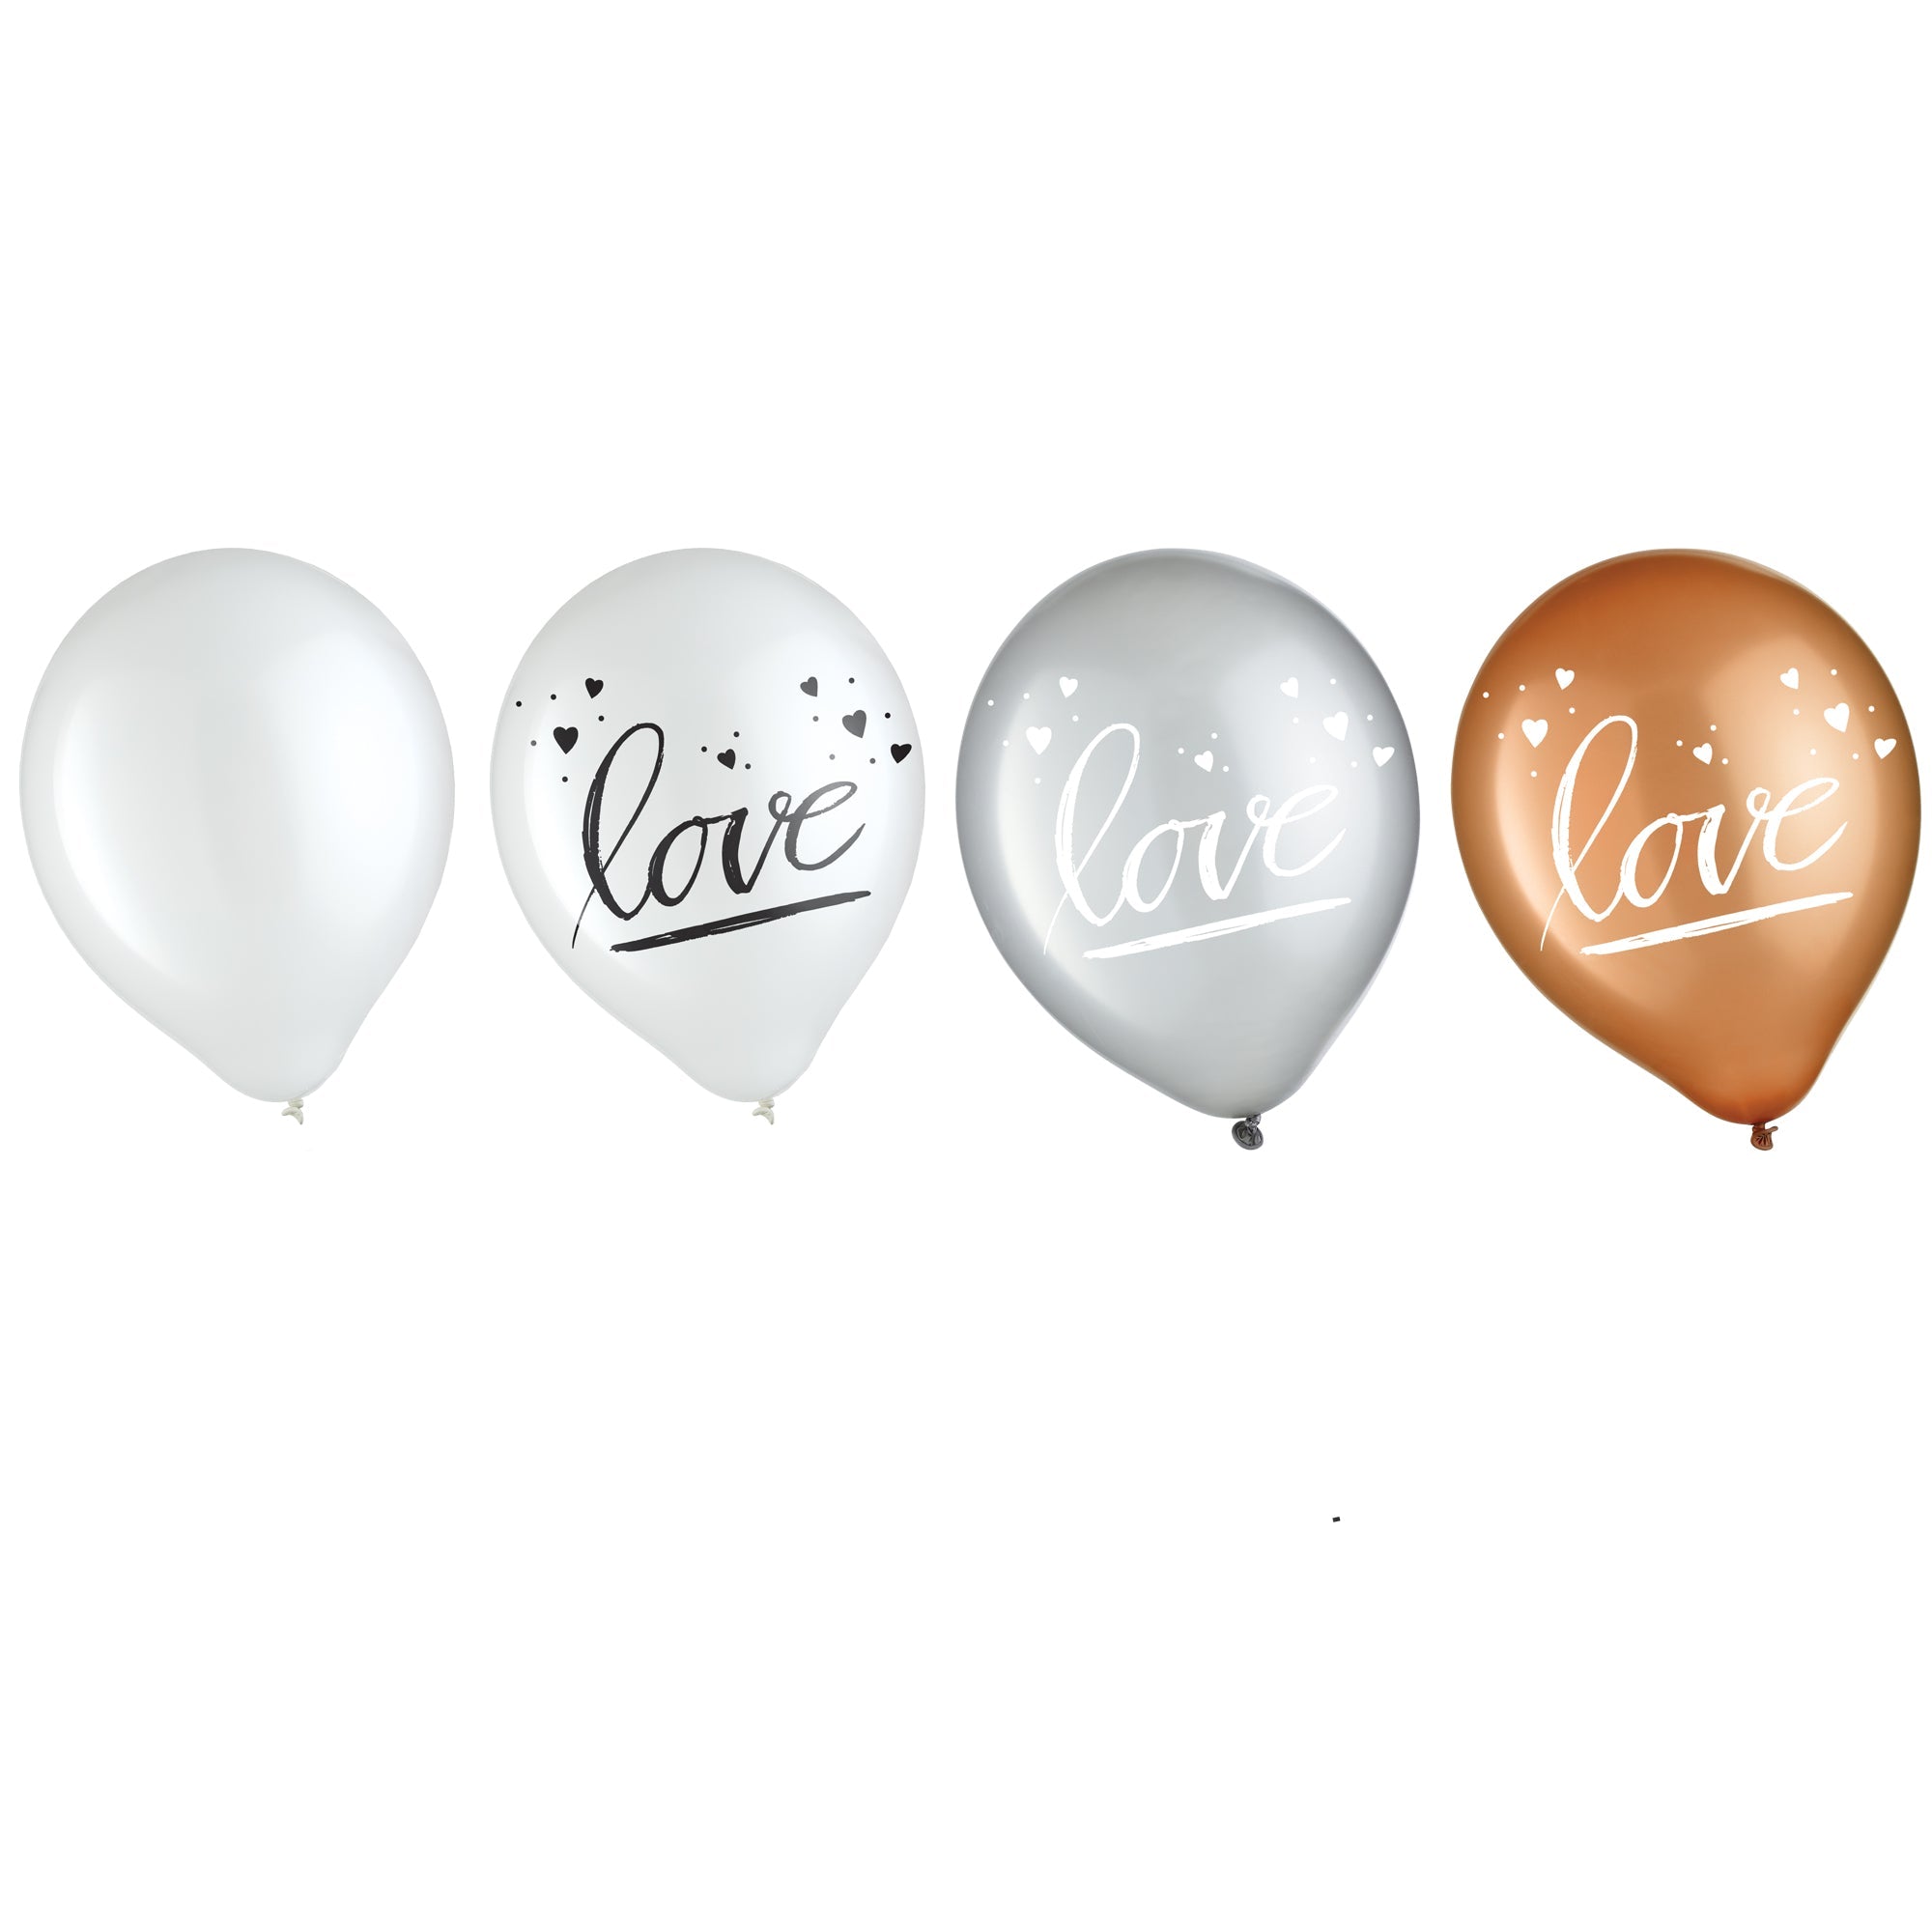 Navy Bride 15 Latex Balloons  Asst. Colors  12in